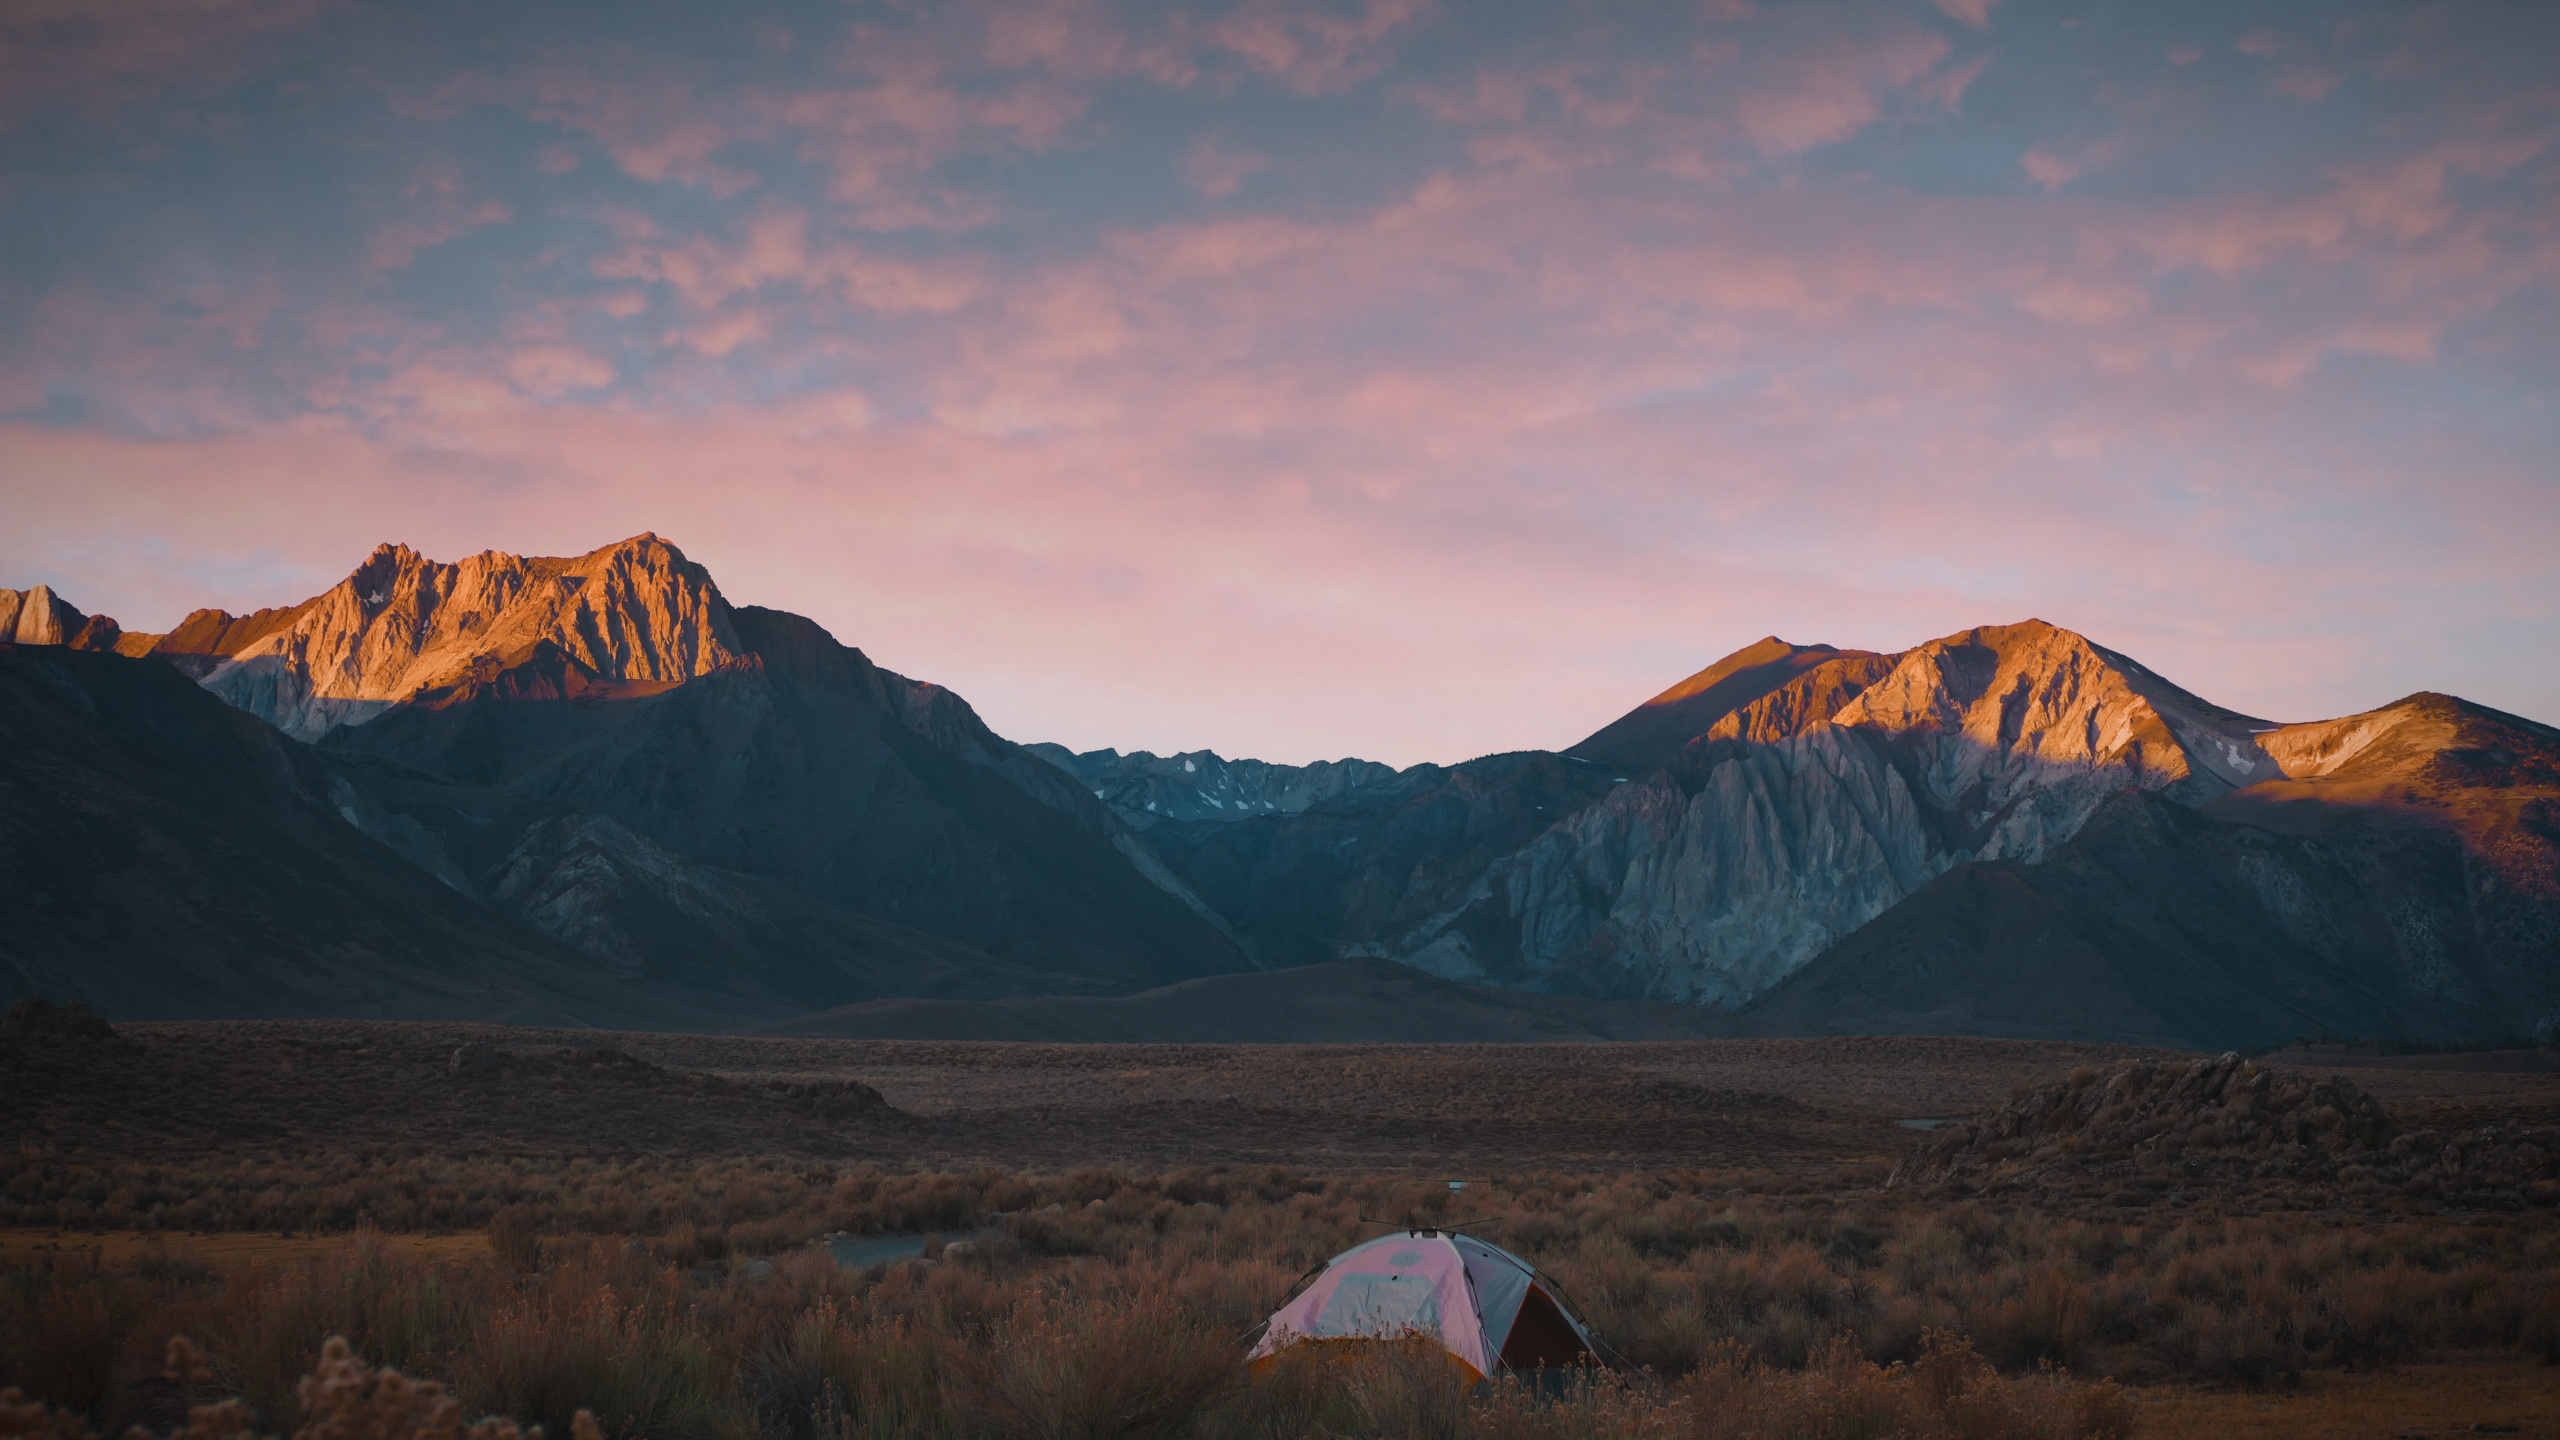 Camping, Les Reliefs Montagneux, Mount Scenery, Colline, Nature. Wallpaper in 2560x1440 Resolution